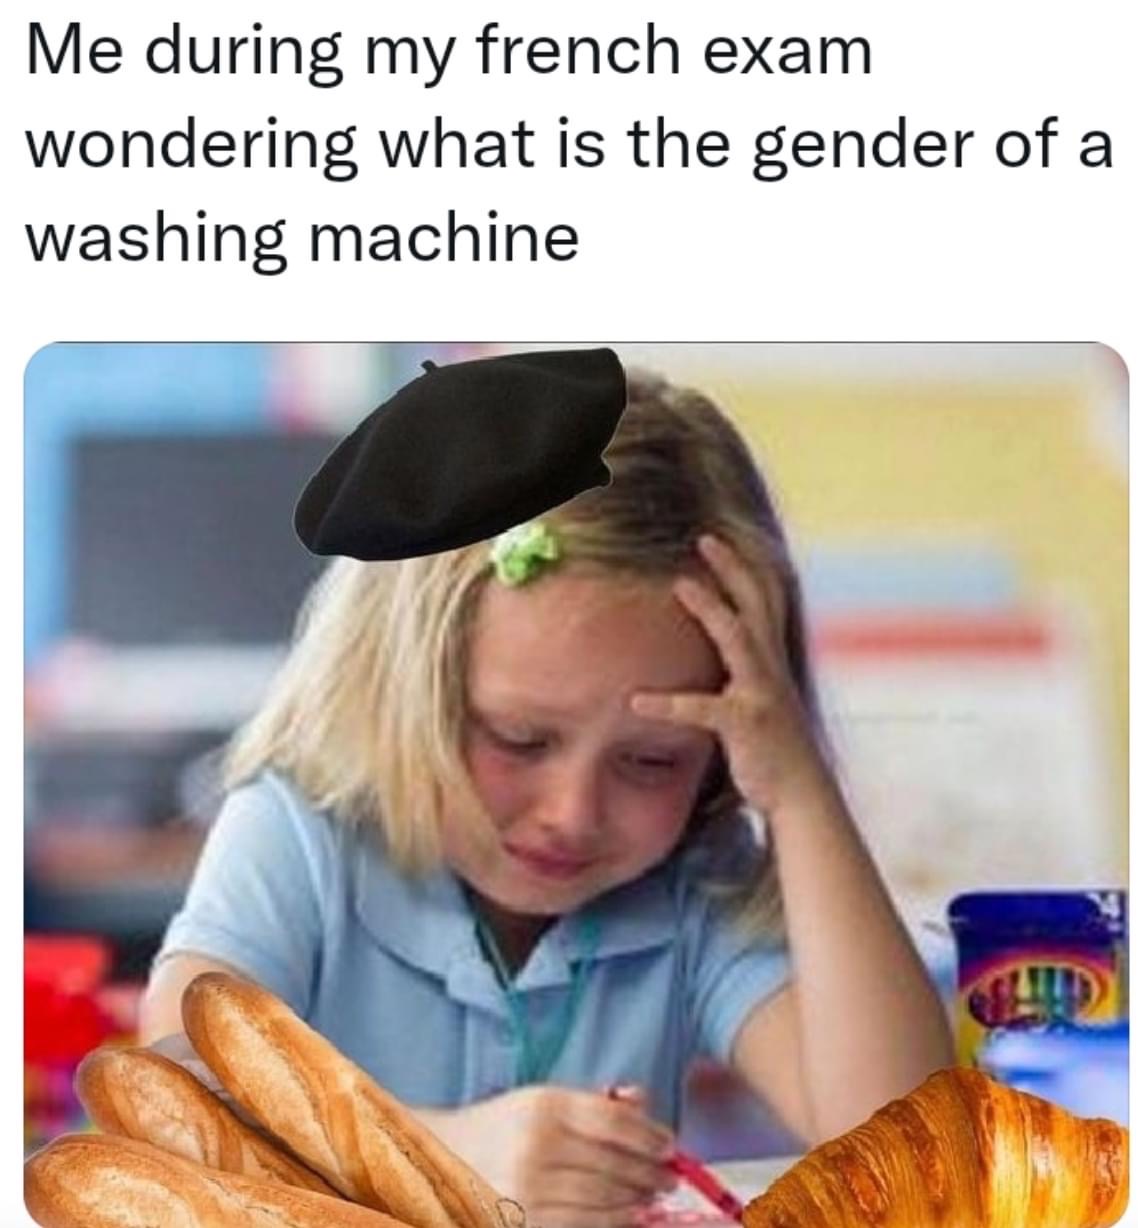 me during my french exam wondering what is the gender of a washing machine, meme